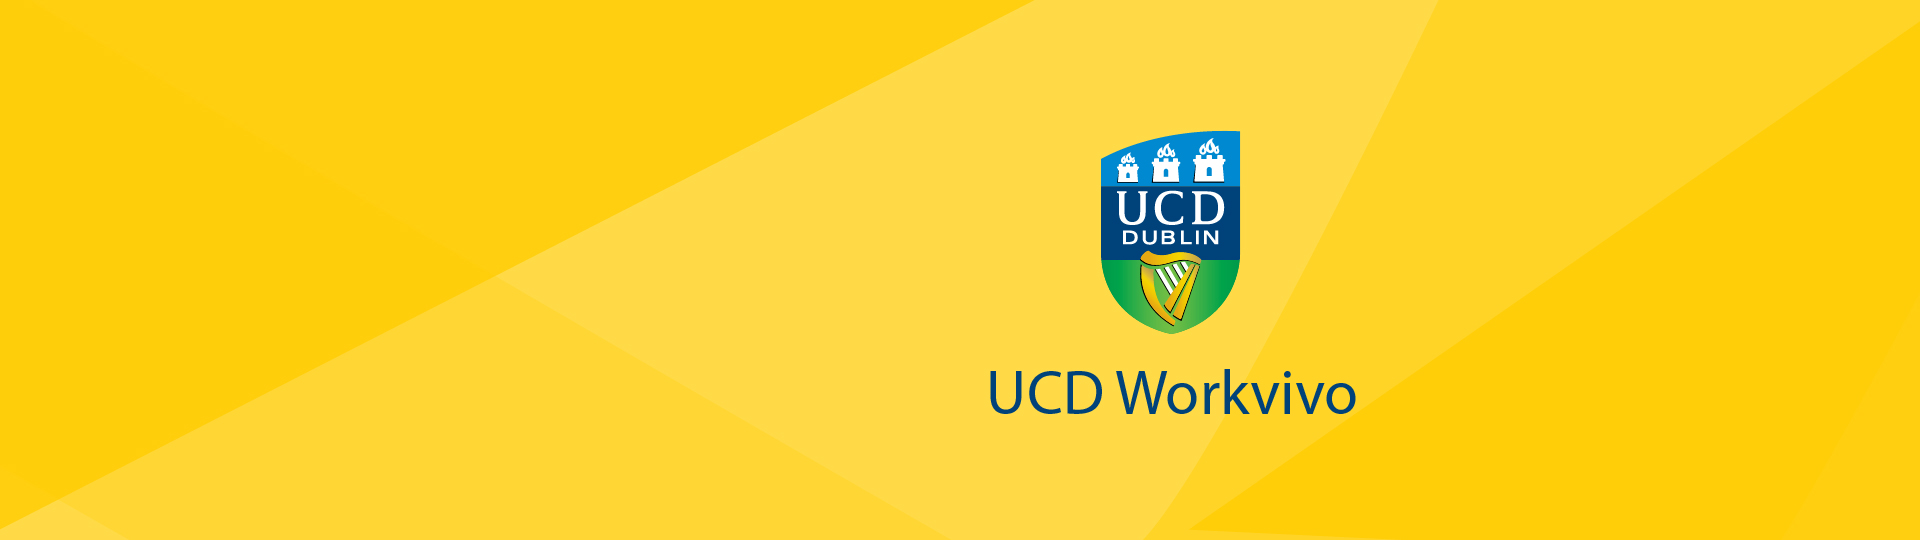 UCD Workvivo in blue text with the UCD logo above it, on a yellow background